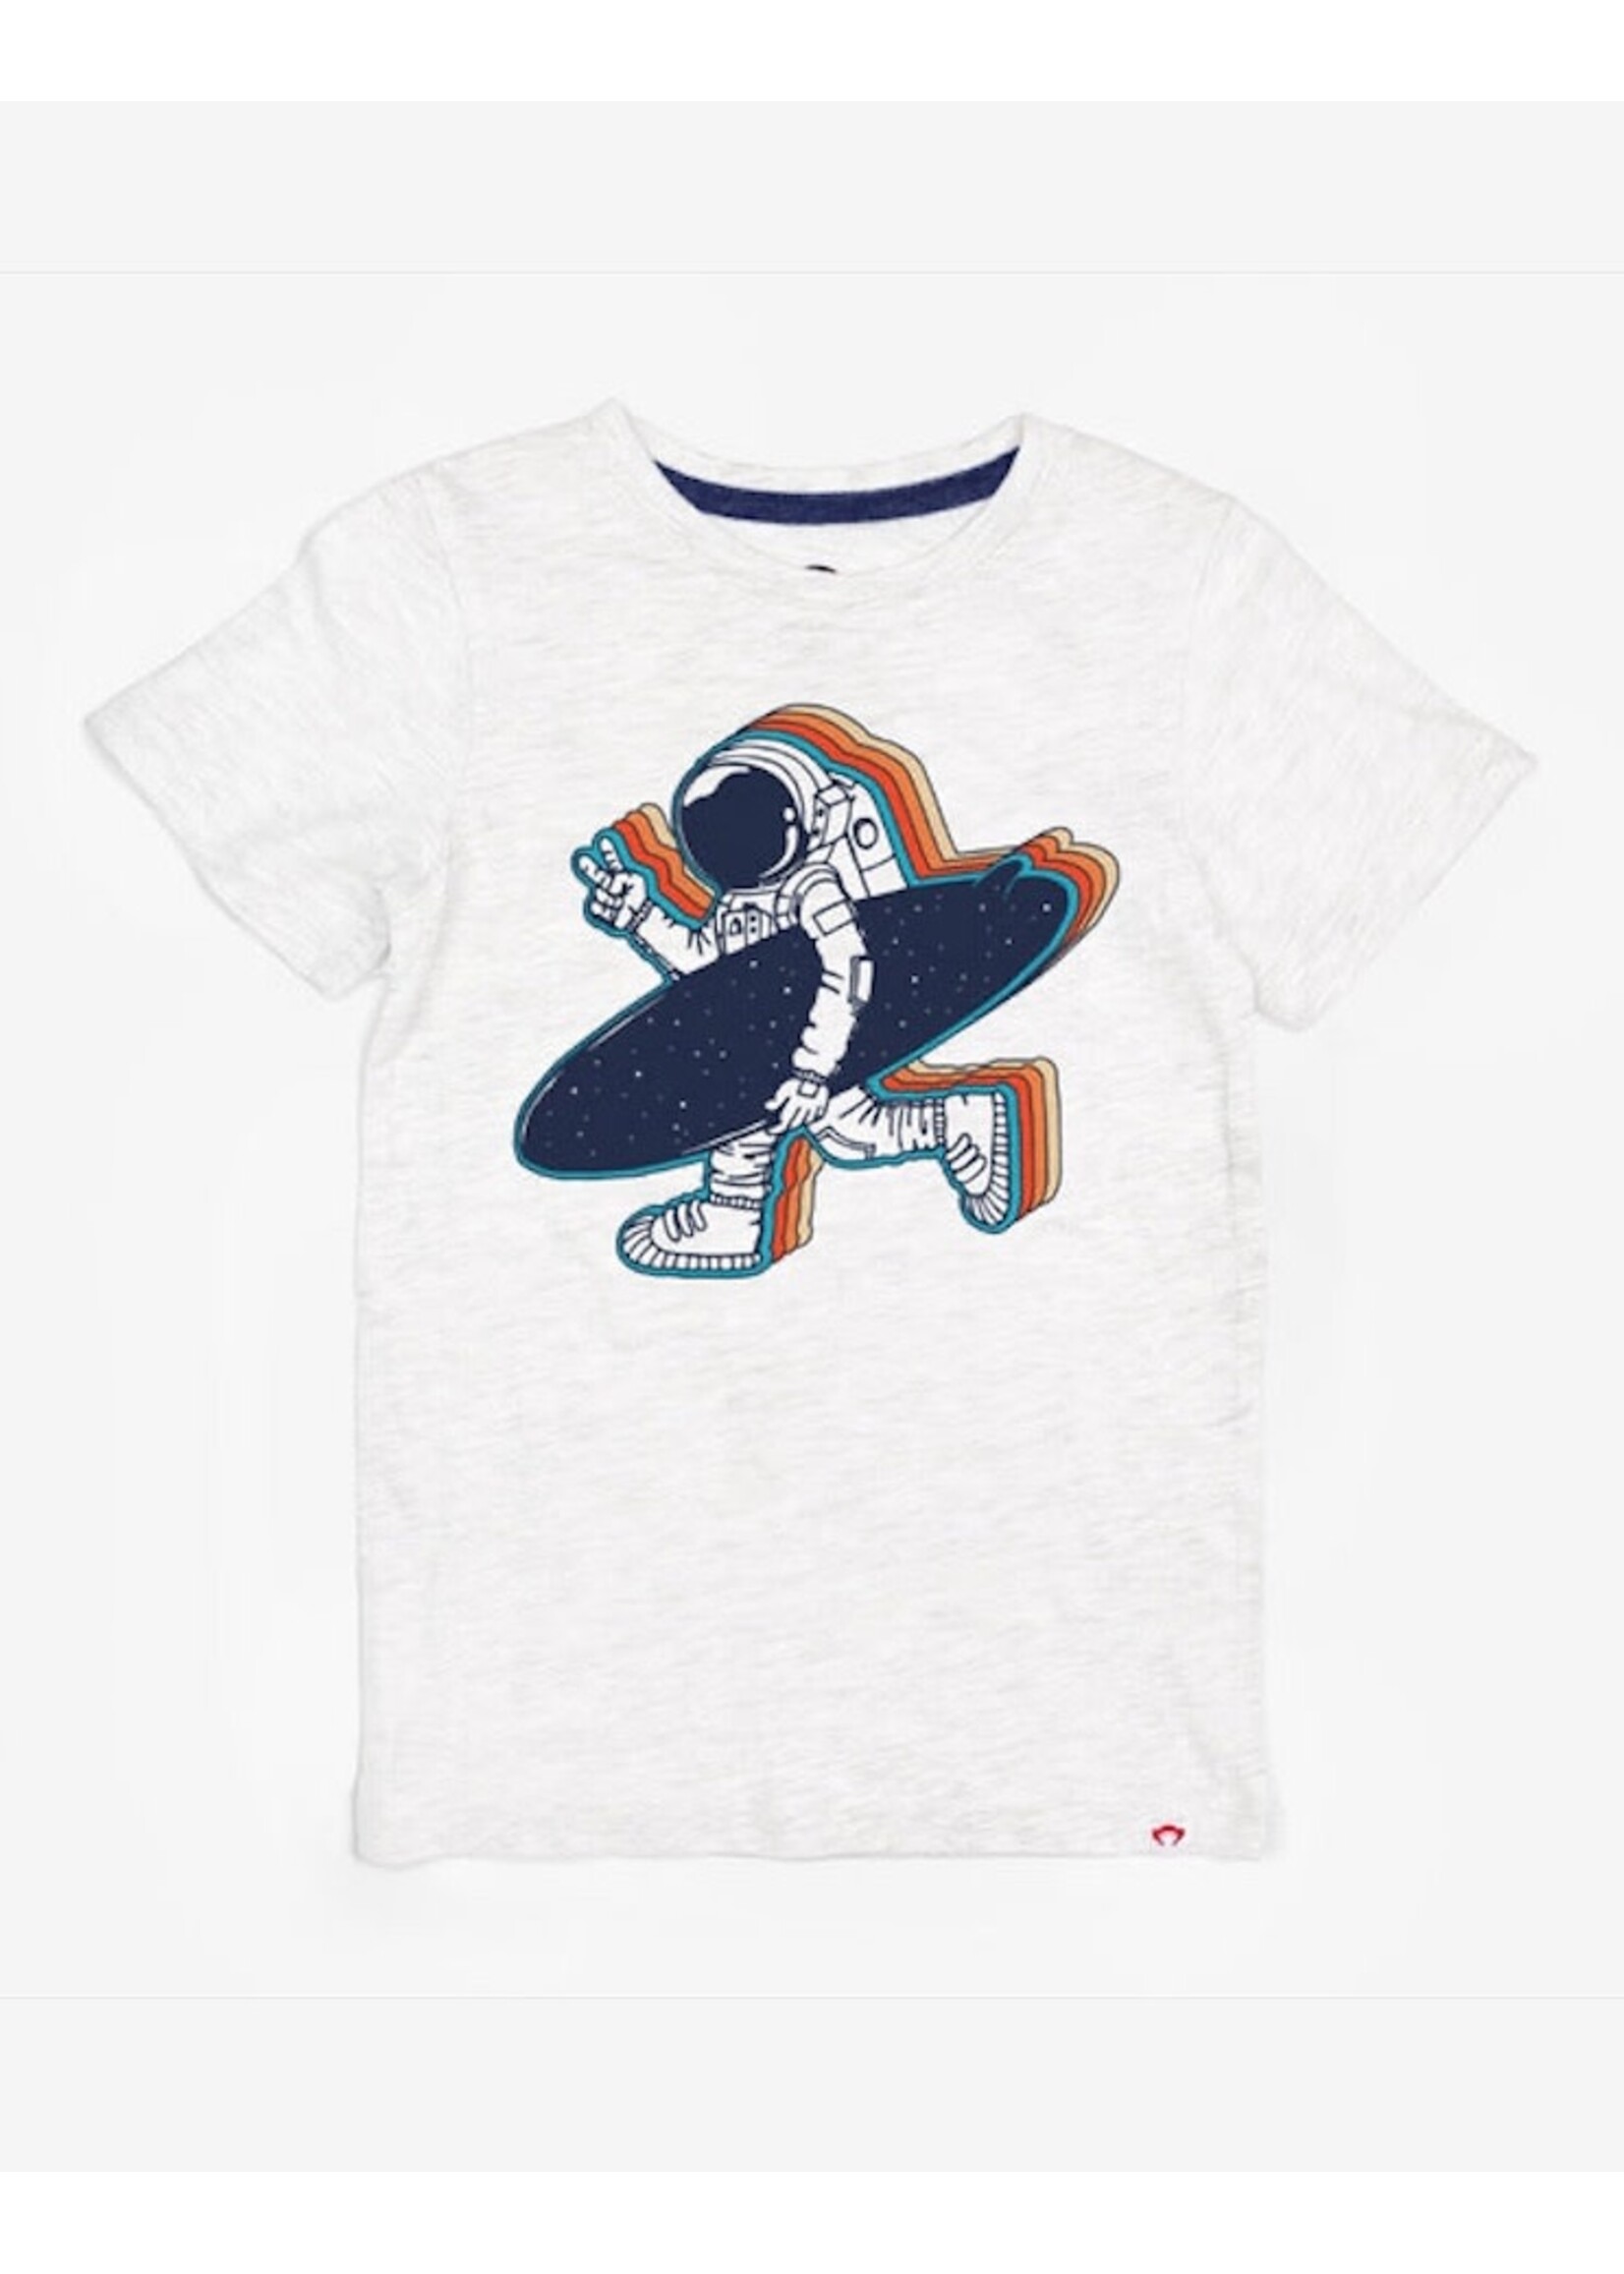 Appaman Appaman, Space Surfer Short Sleeve Graphic Tee || White